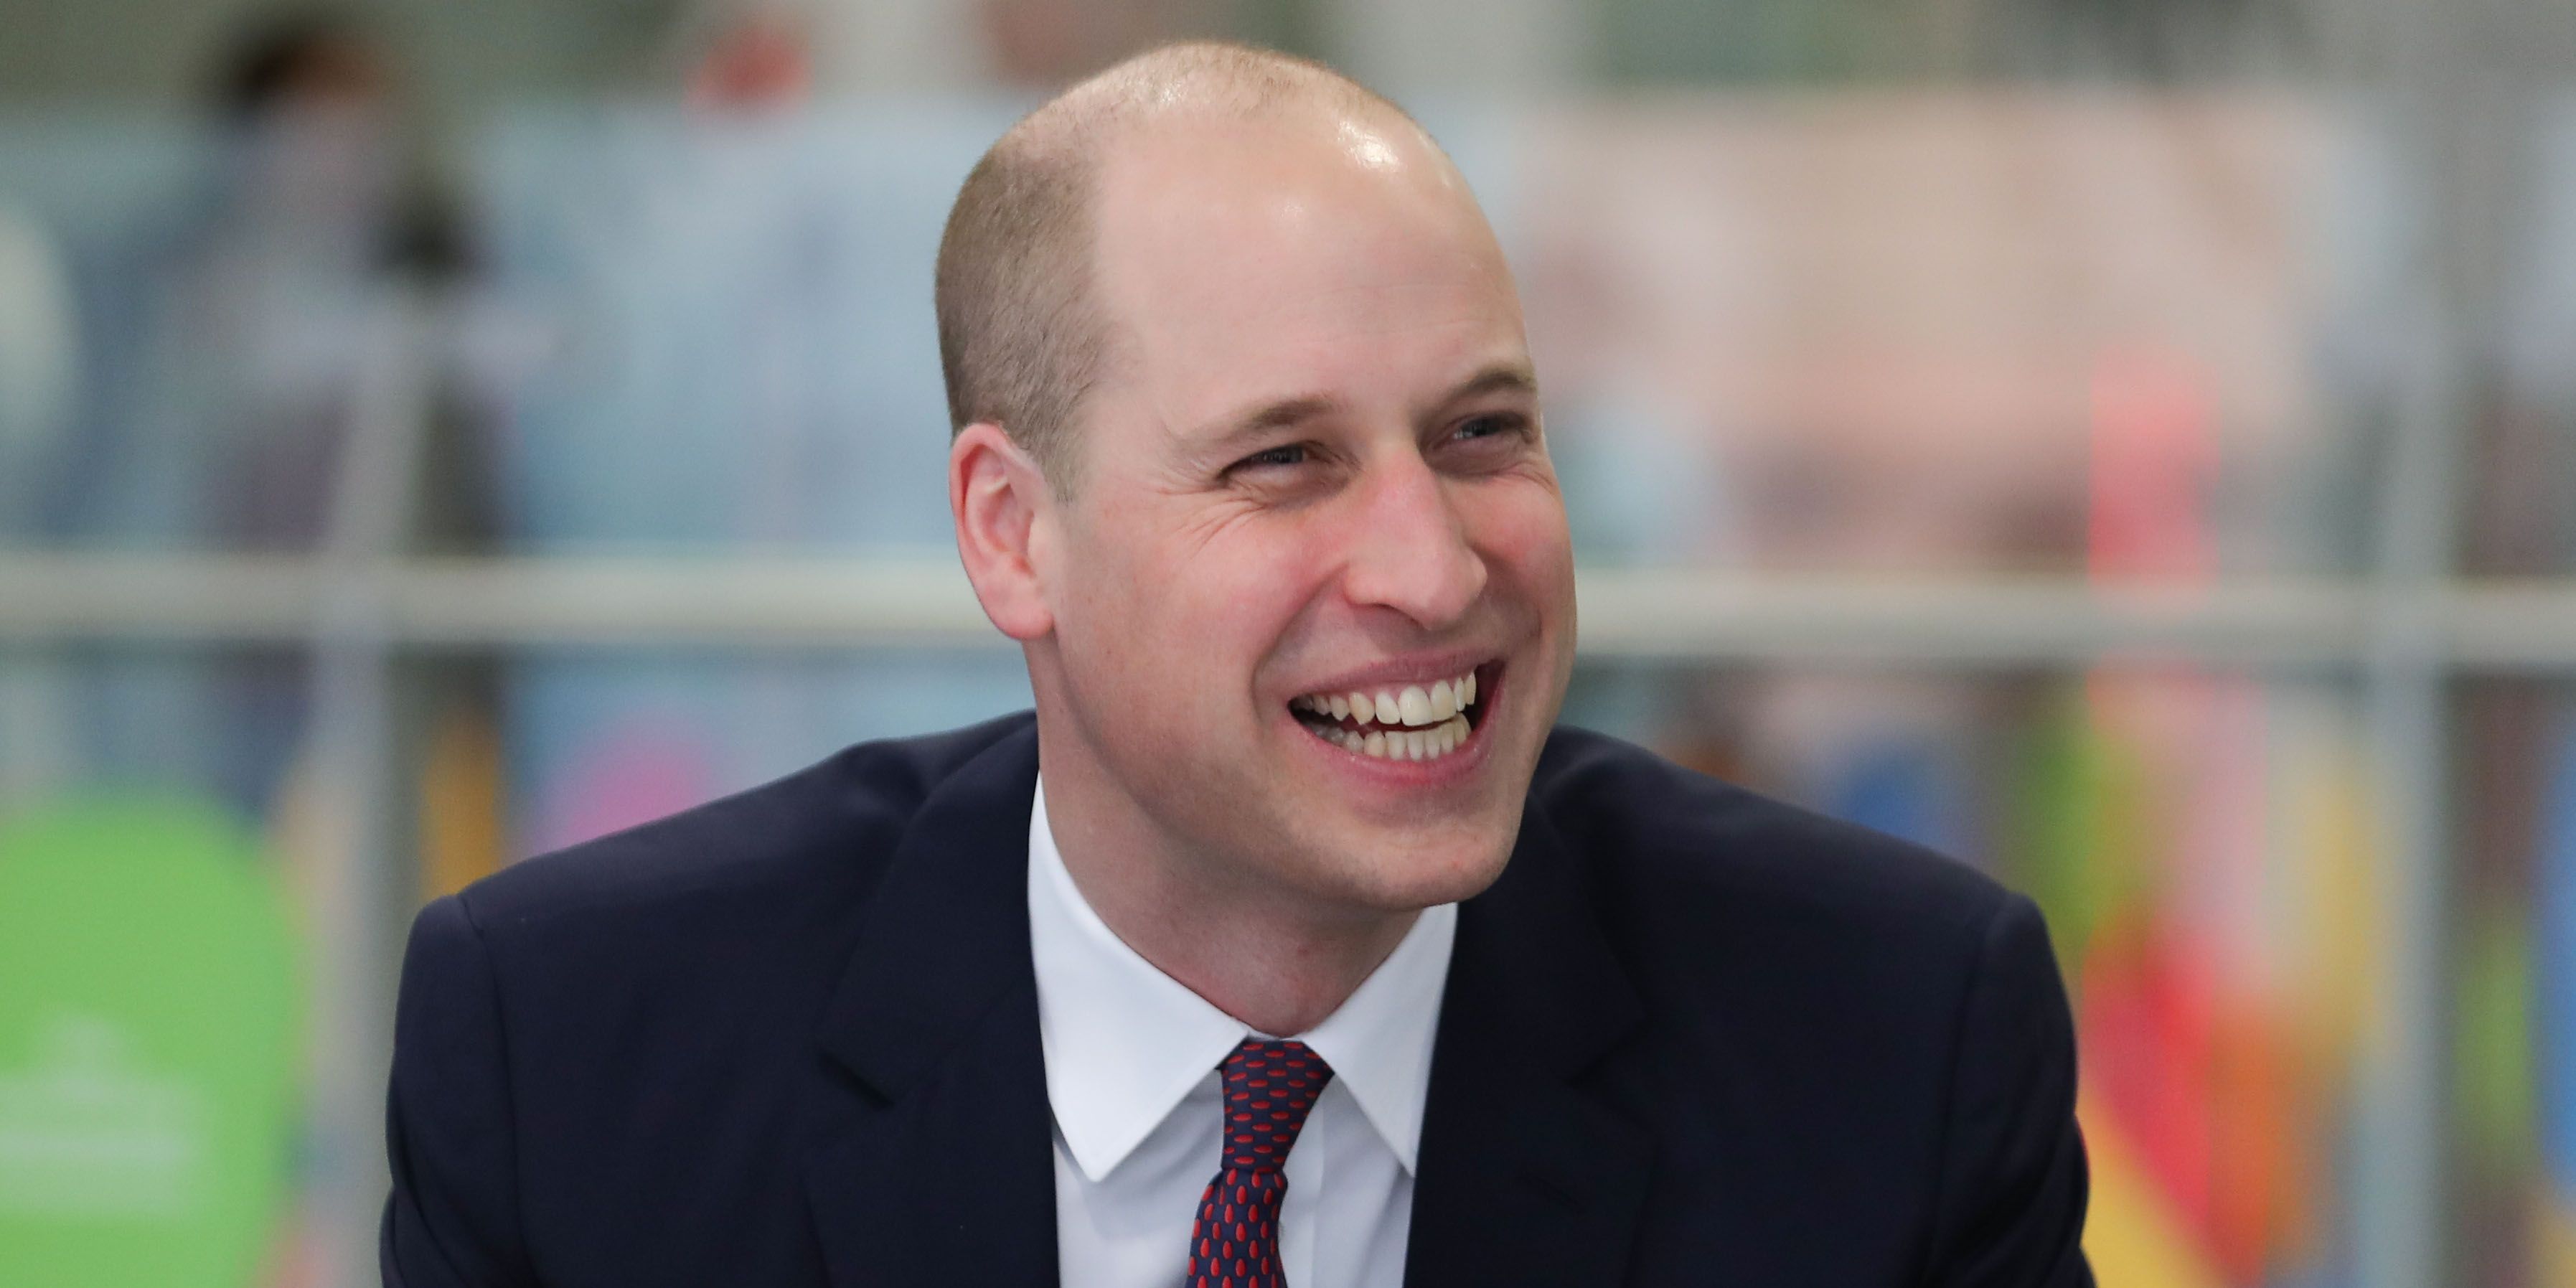 Prince William S New Haircut Is Causing A Ton Of Twitter Buzz